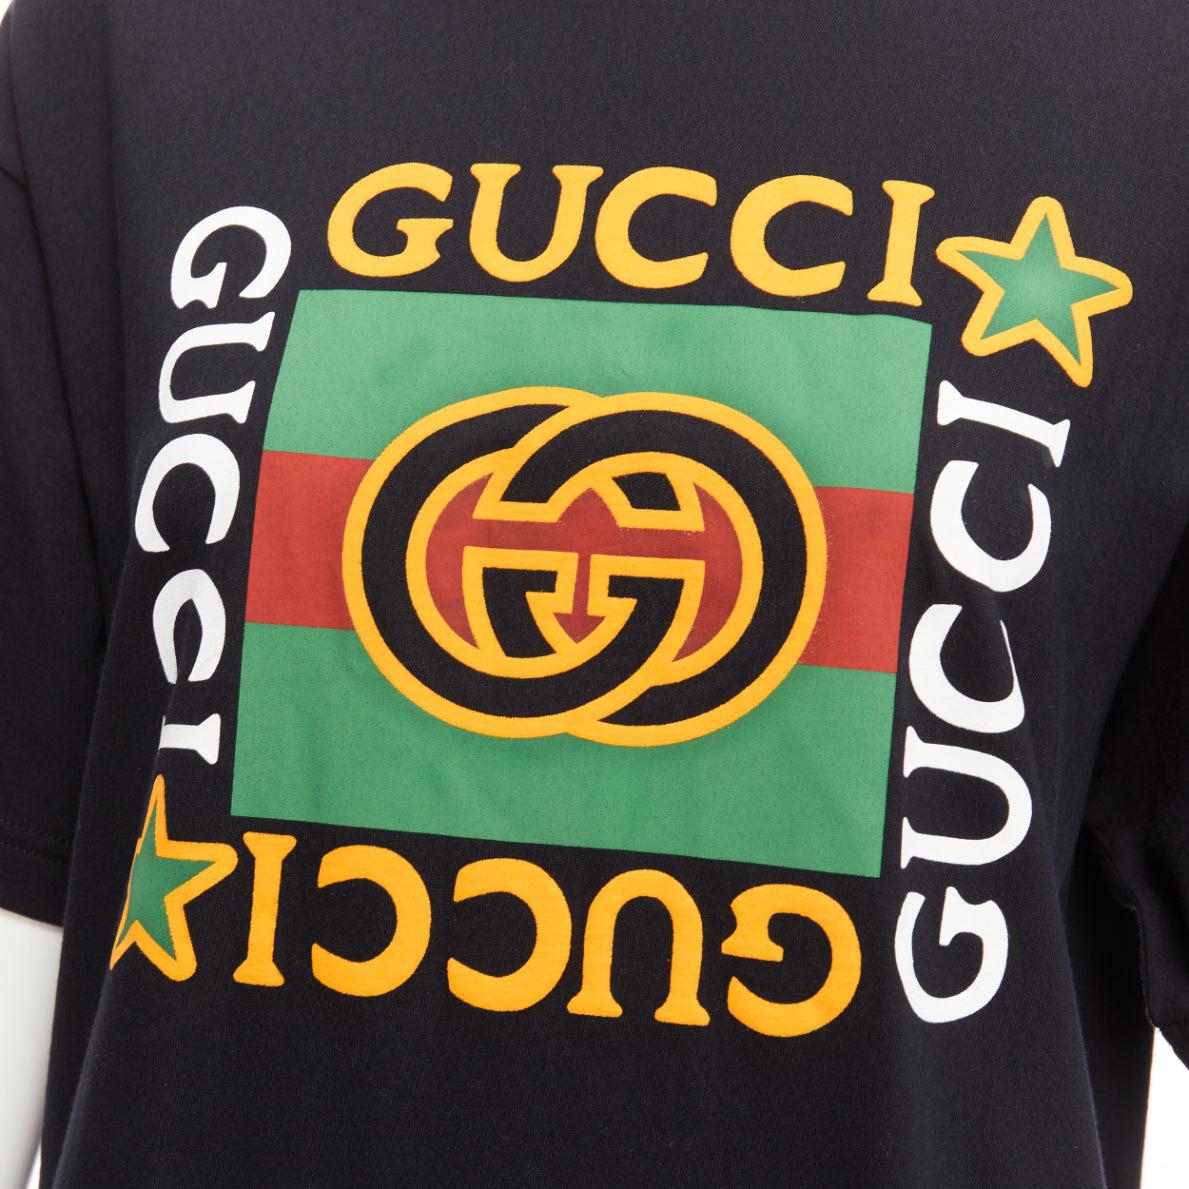 GUCCI black Vintage GG box logo cotton long relaxed tshirt XXS
Reference: AAWC/A00757
Brand: Gucci
Designer: Alessandro Michele
Material: Cotton
Color: Black, Multicolour
Pattern: Solid
Closure: Slip On
Made in: Italy

CONDITION:
Condition: